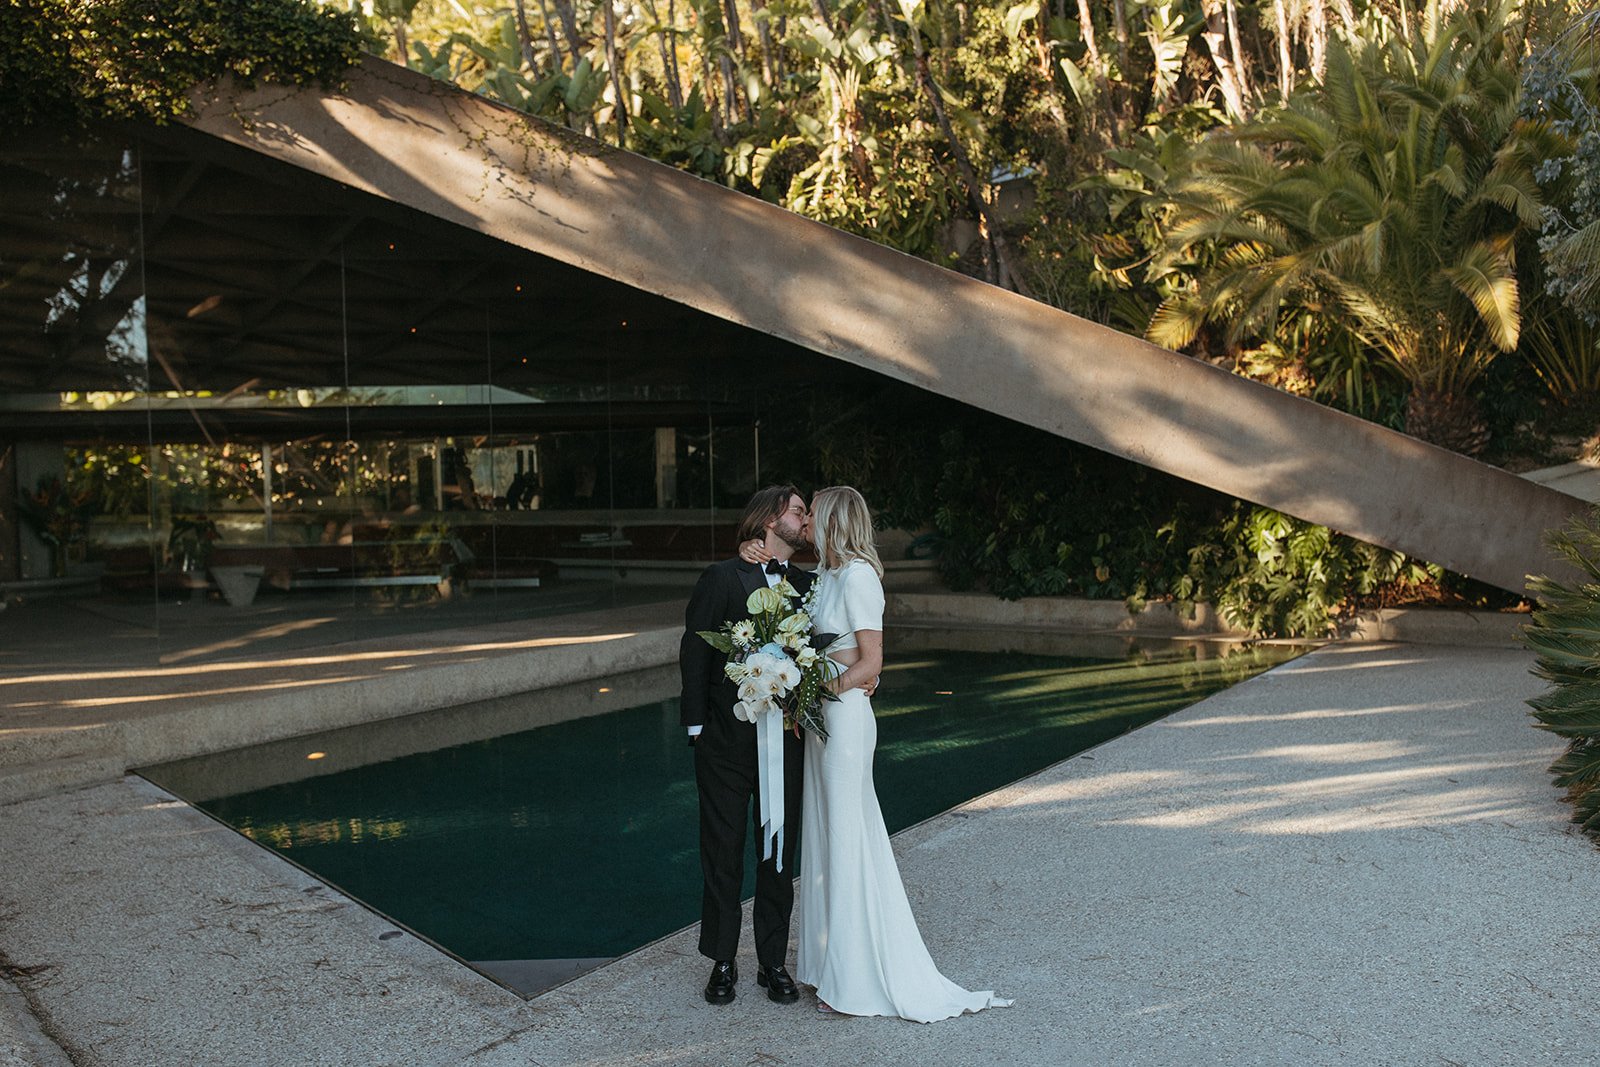 the iconic Sheats–Goldstein Residence was an incredible spot for just-married photos